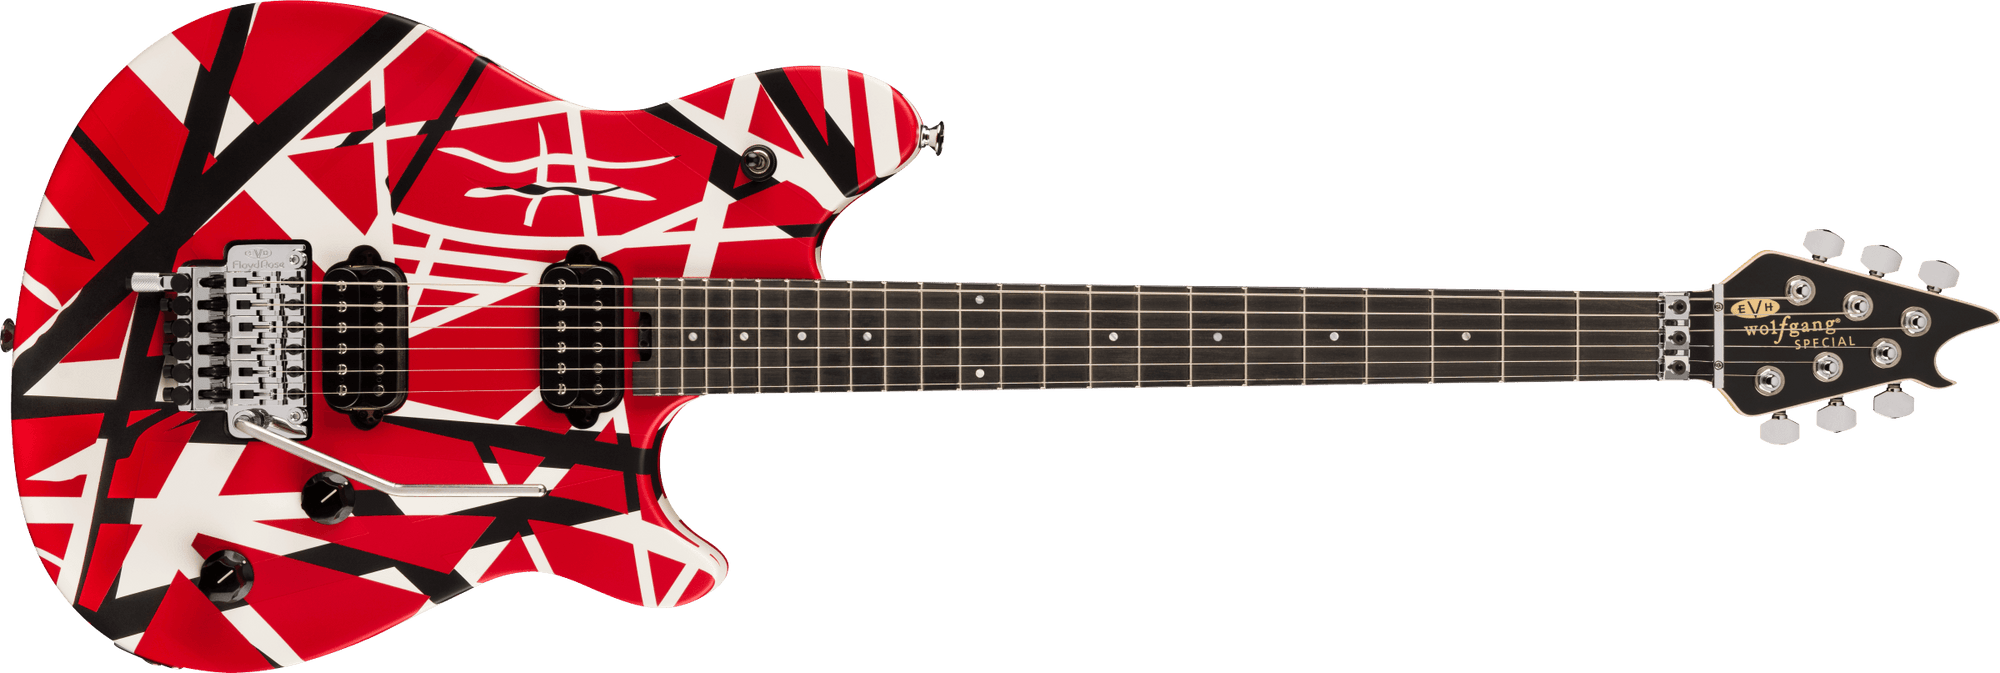 EVH Wolfgang Special Striped Series Ebony Fingerboard Satin Red, Black, and White 5107702315